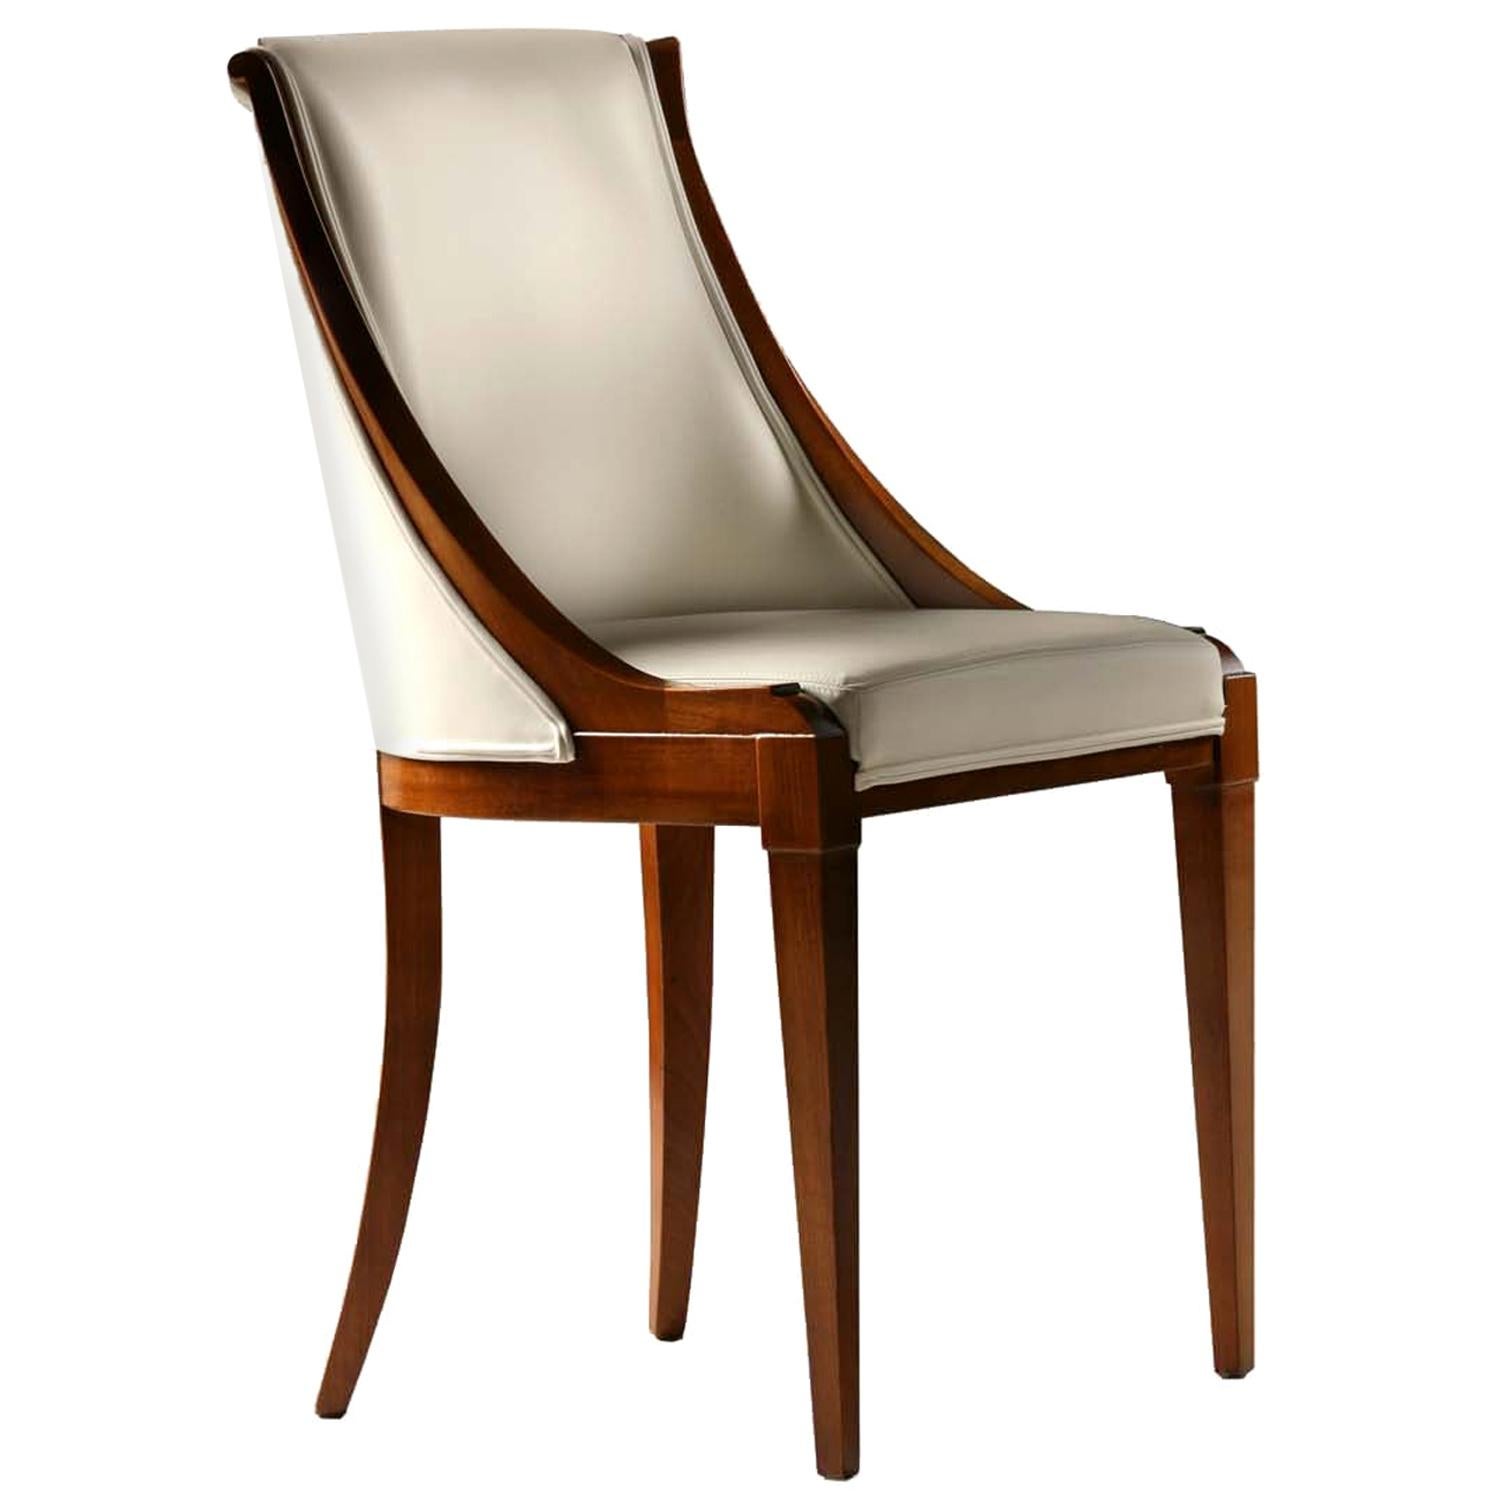 Musa, Upholstered Chair Made of Cherrywood